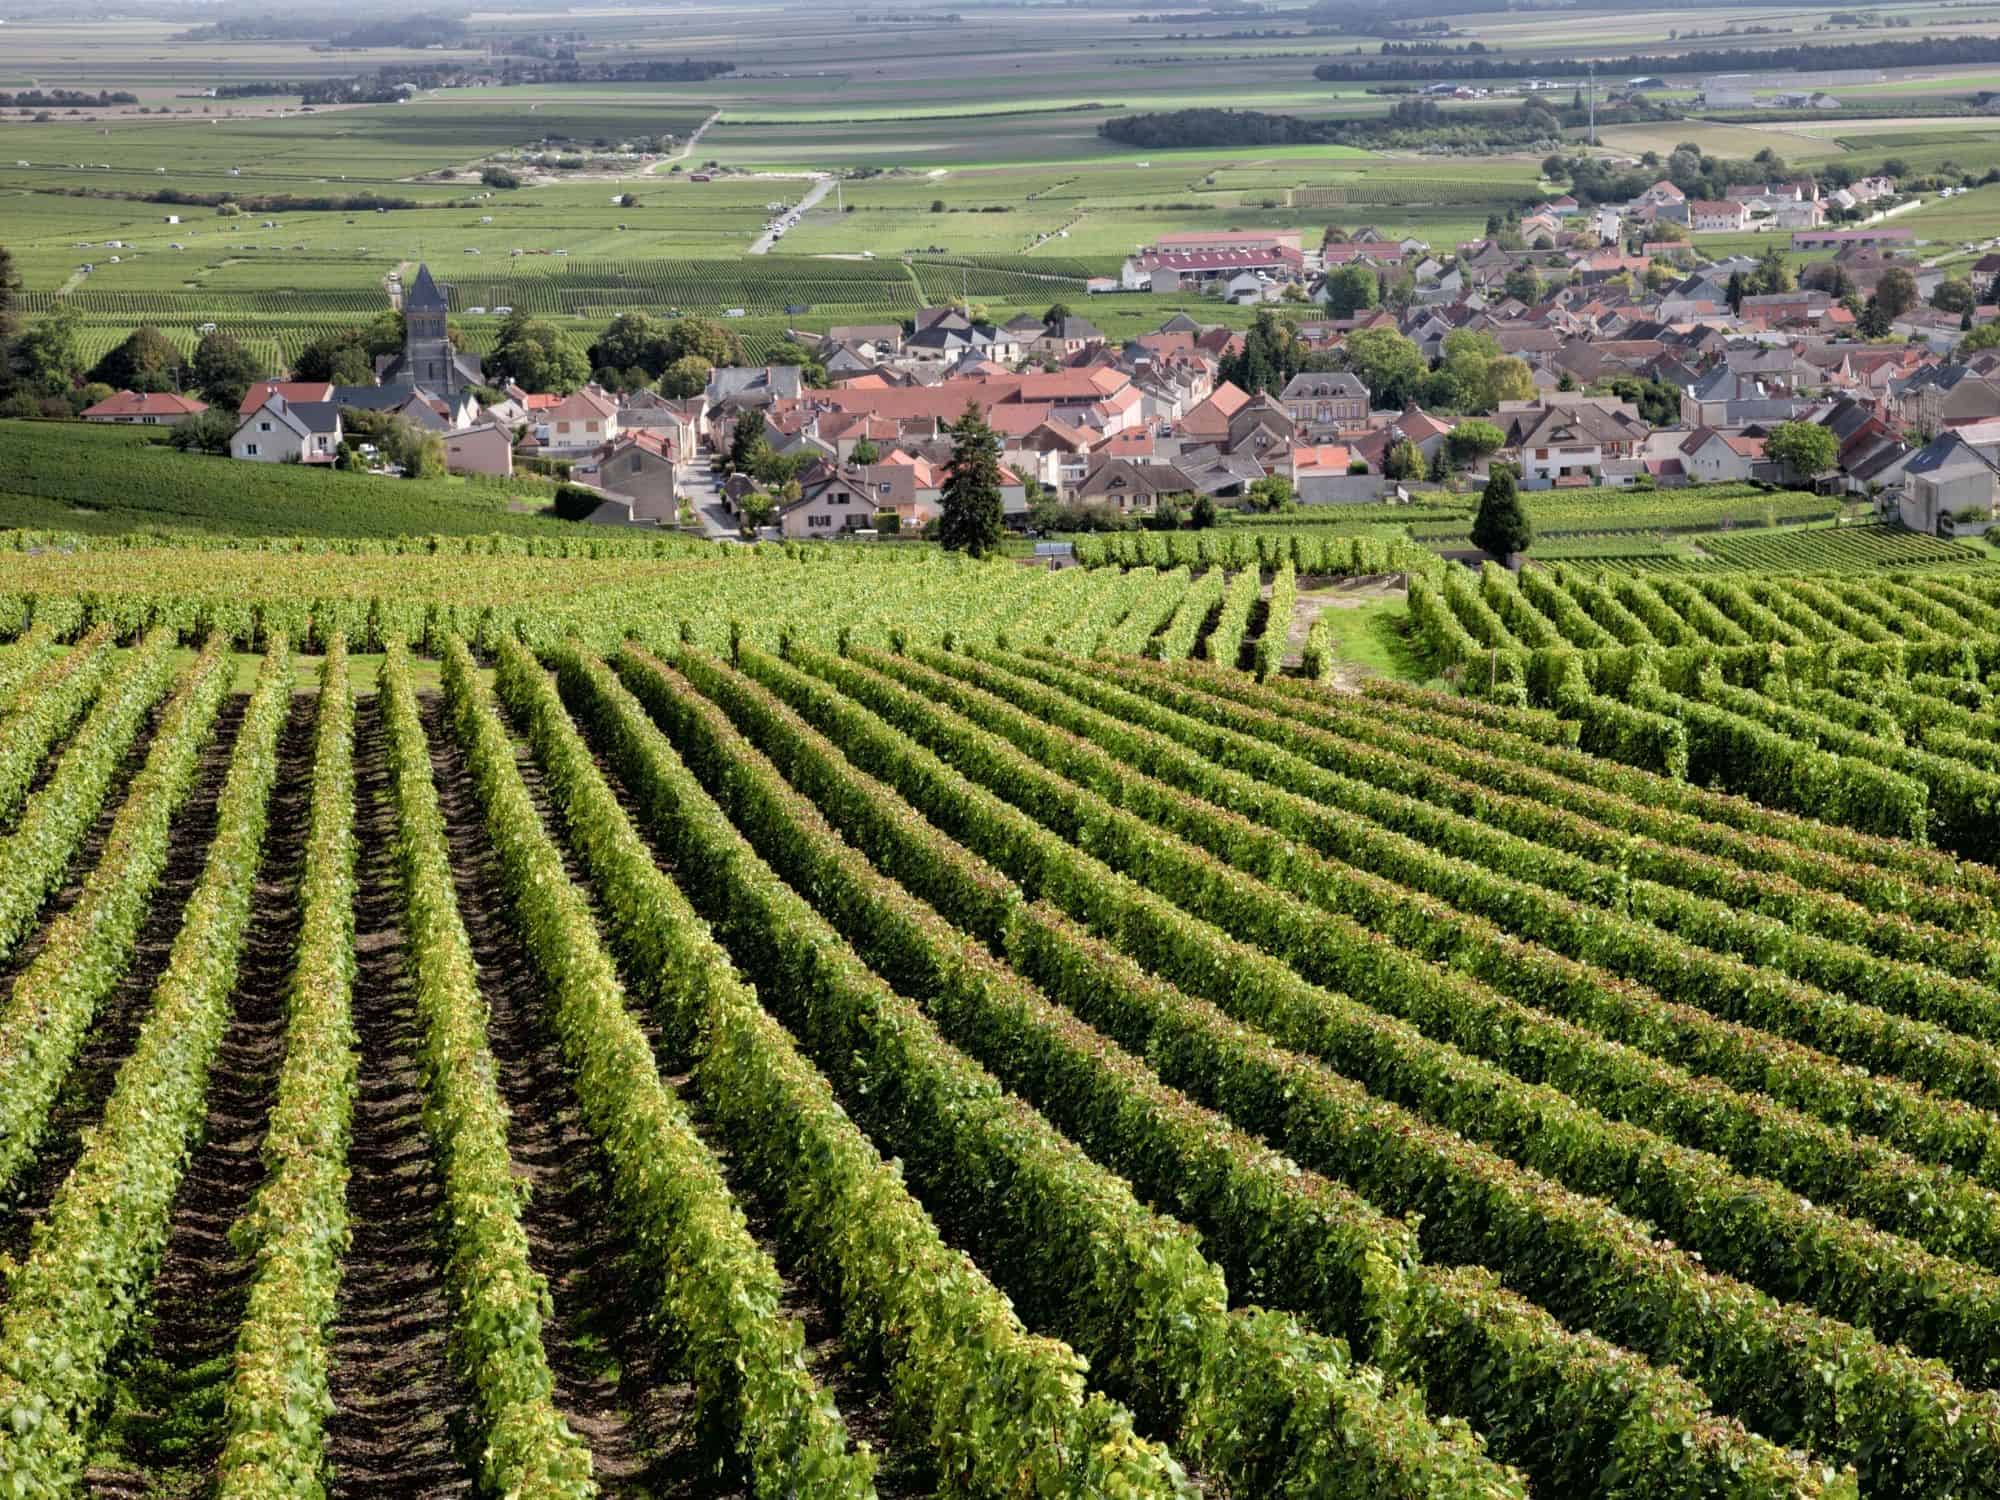 France - Burgundy - vineyards you can visit as part of a sailing trip